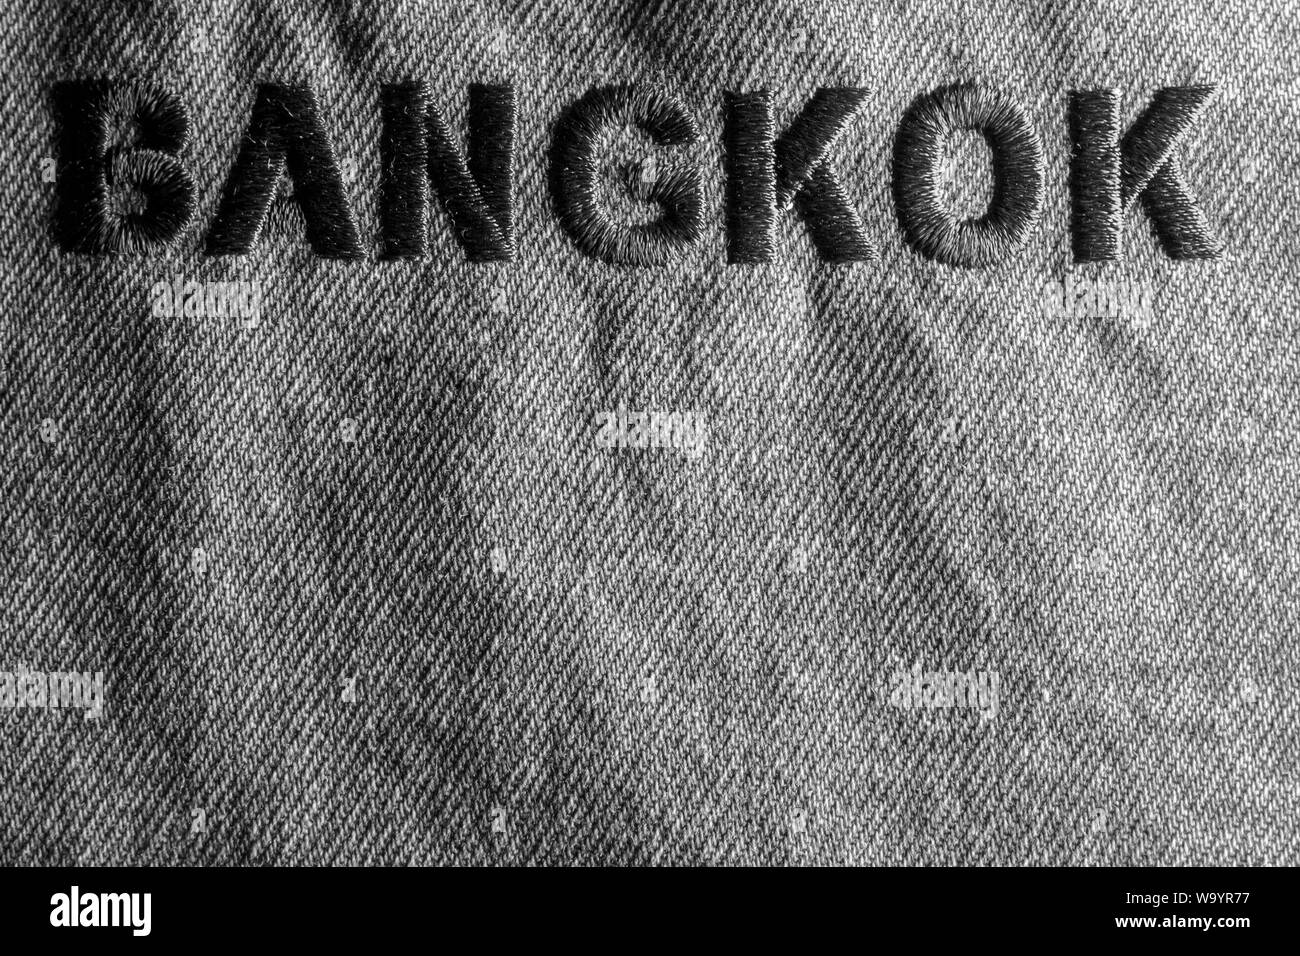 Background blue jeans labeled Bangkok embroidery on jeans. Stock Photo